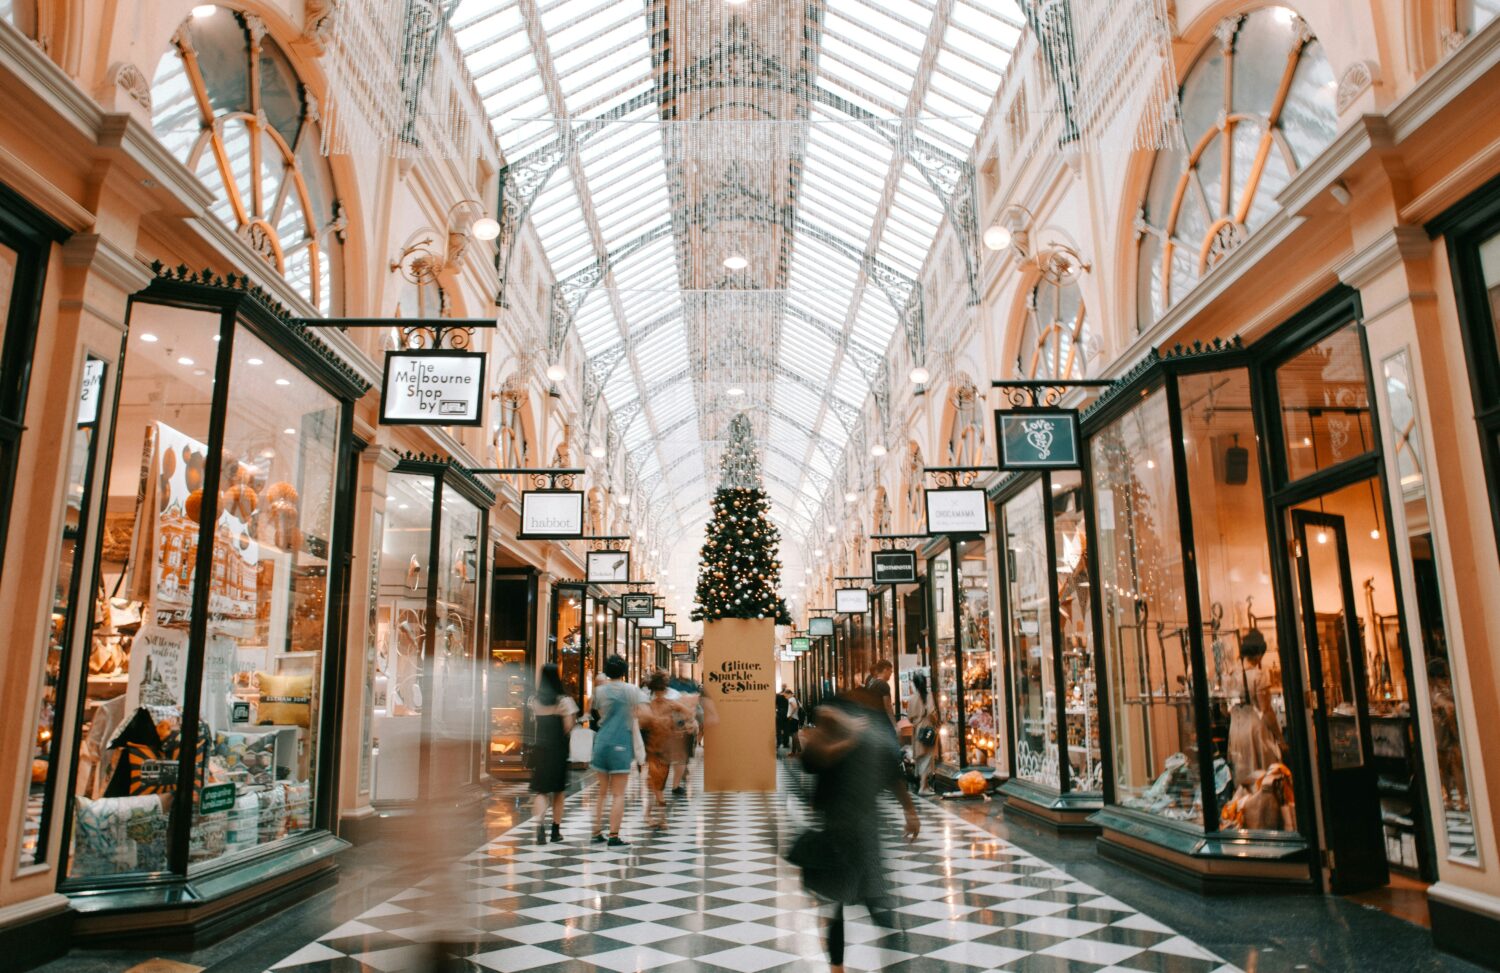 A Melbourne arcade decorated for Christmas